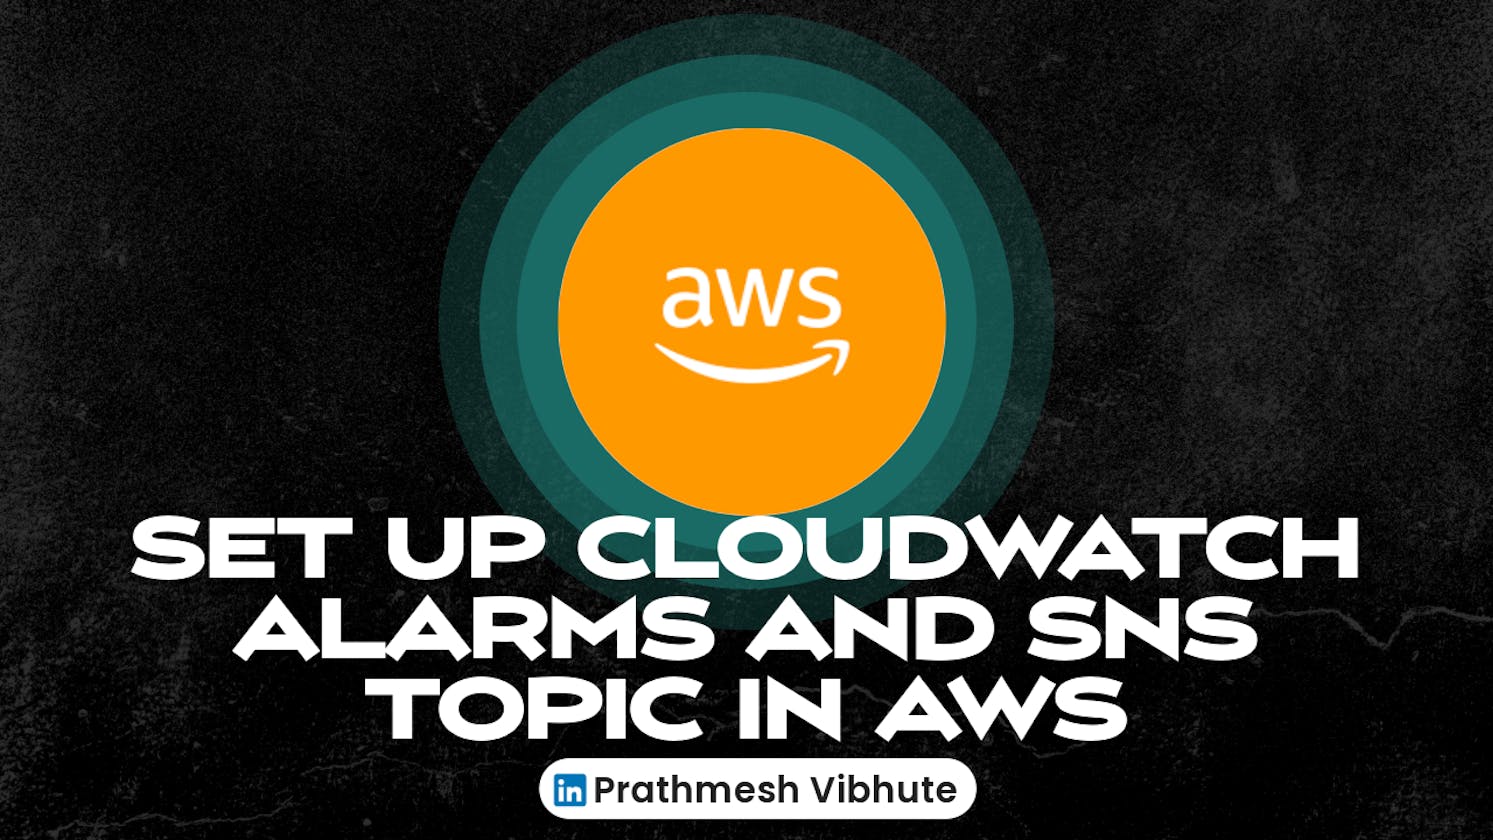 Day-46: Set up CloudWatch alarms and SNS topic in AWS